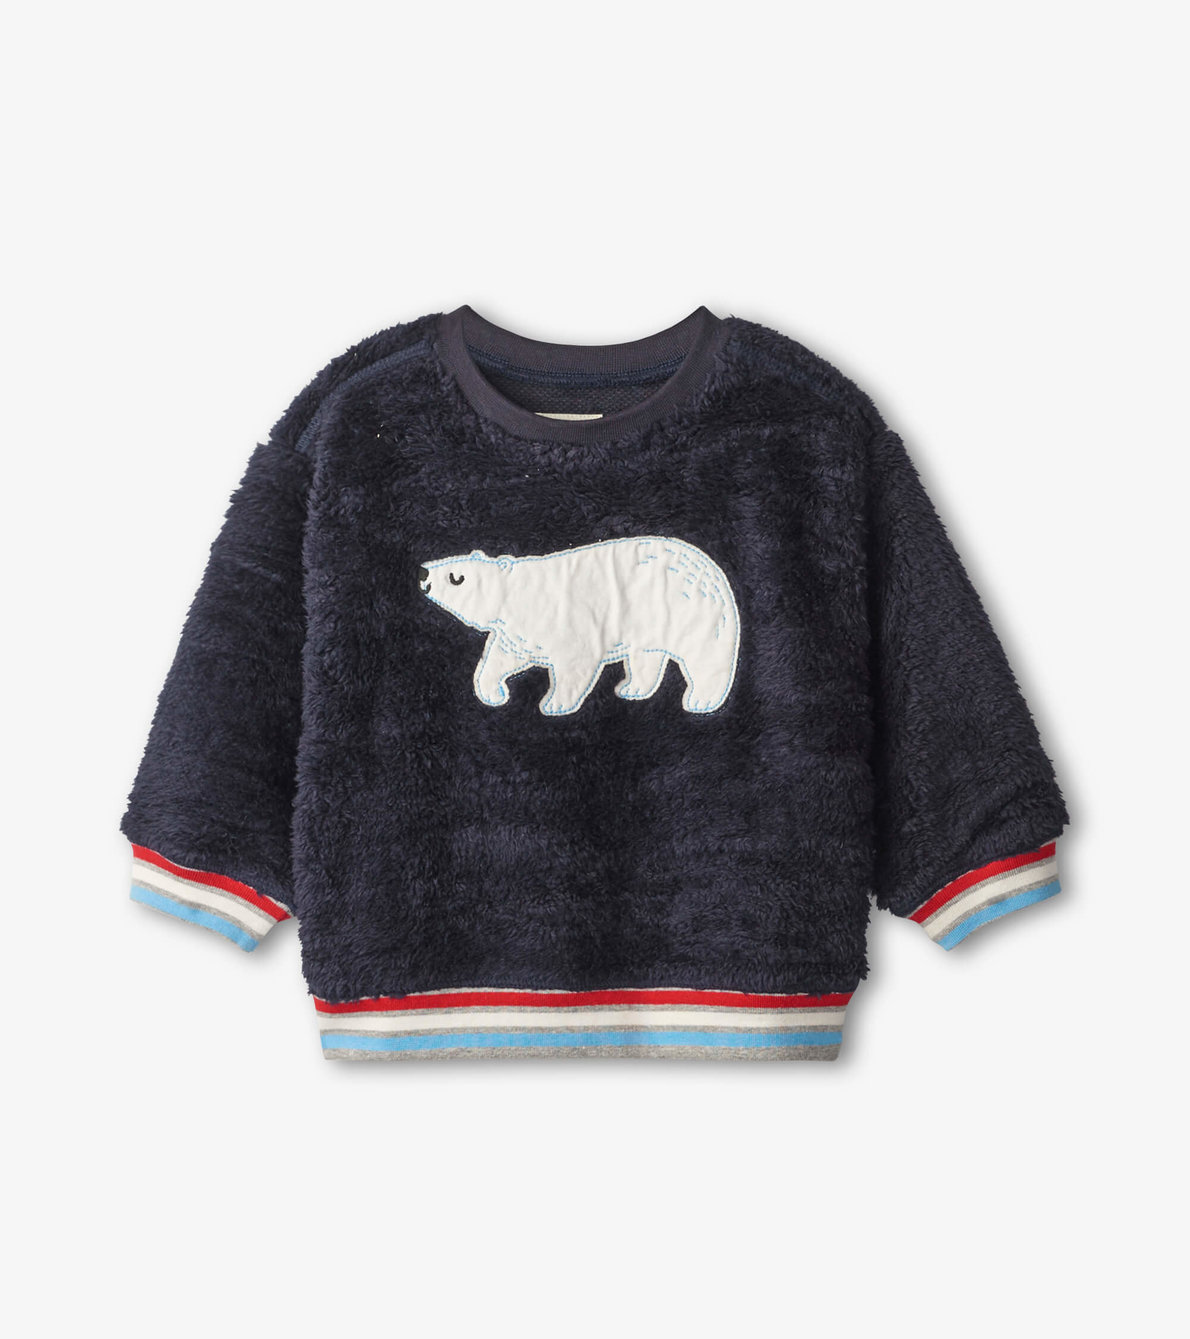 View larger image of Polar Bear Sherpa Fleece Baby Pull Over